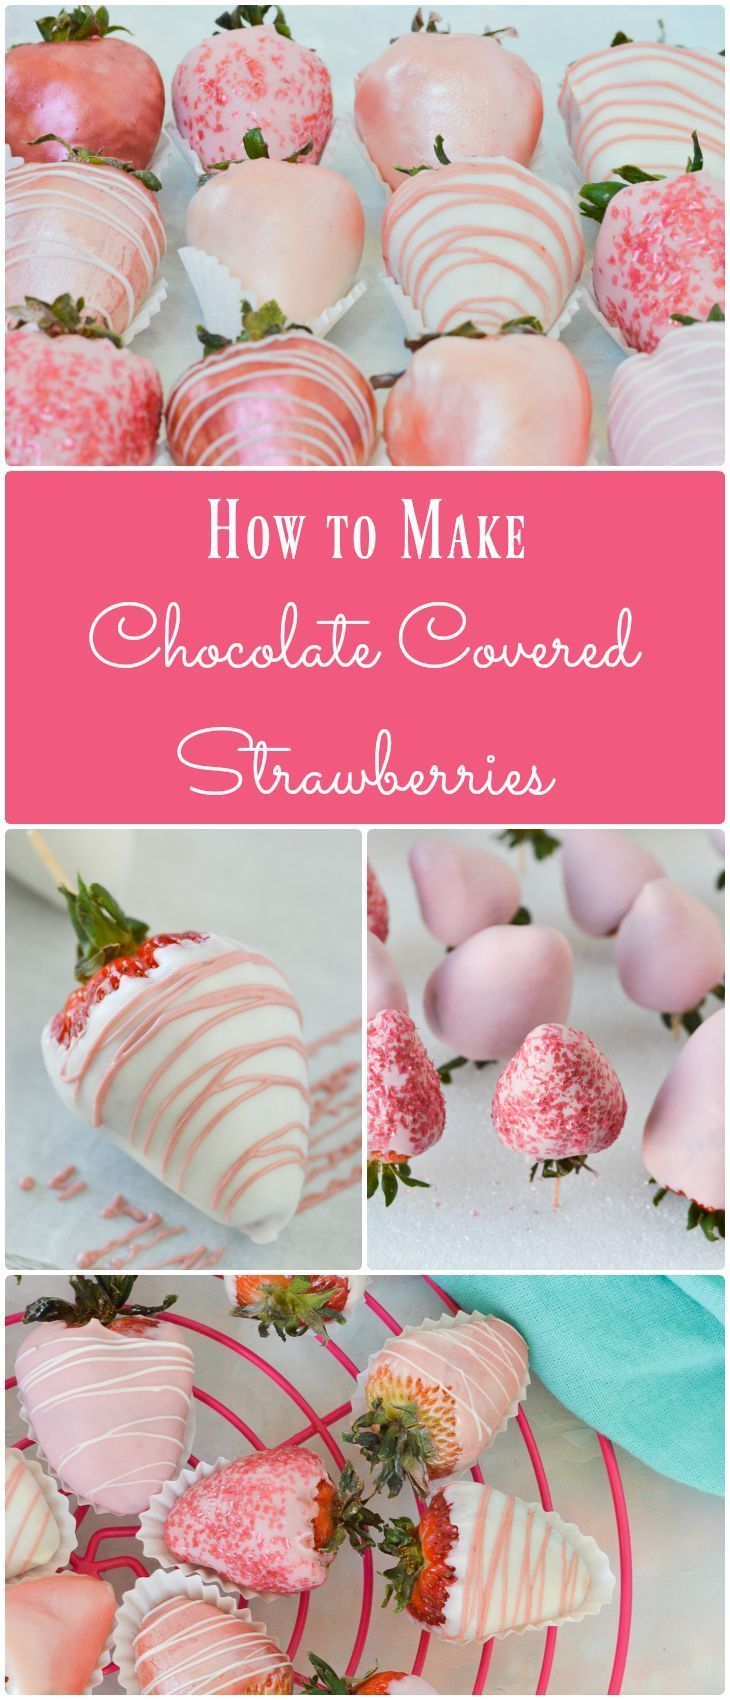 Chocolate Covered Strawberries -   15 mothers day desserts Chocolate ideas